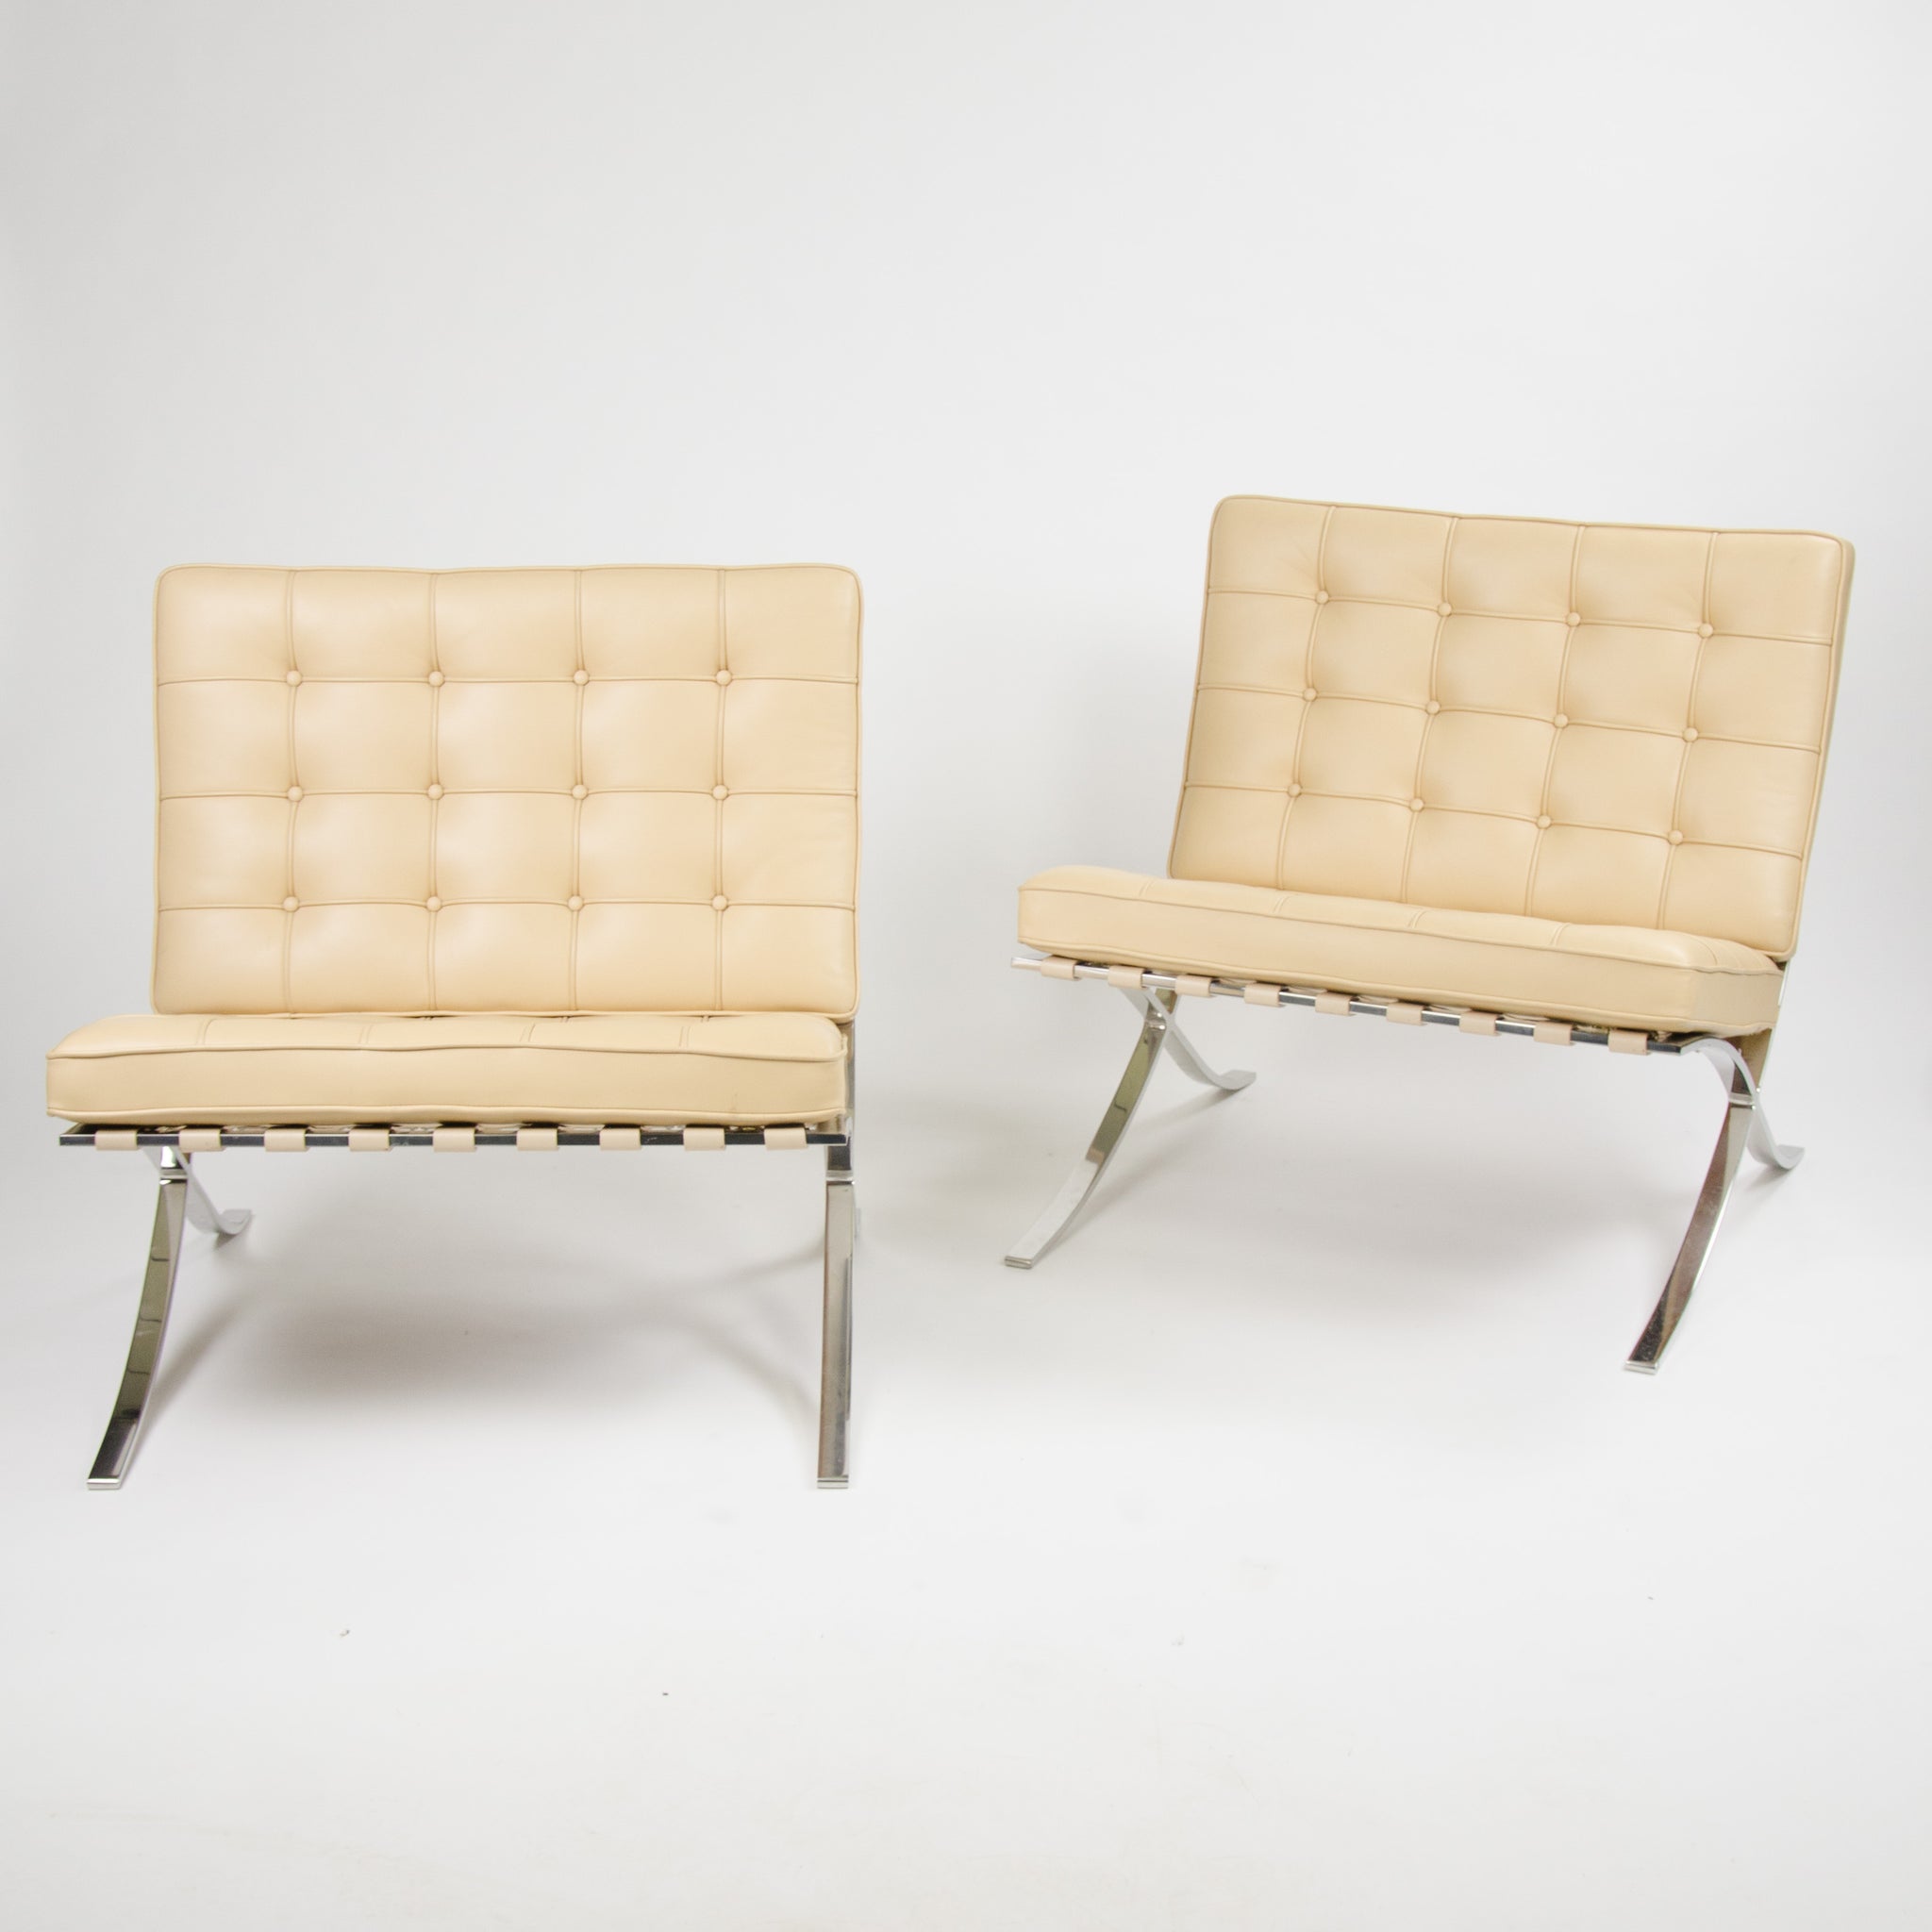 SOLD Knoll Mies Van Der Rohe Barcelona Chairs Tan Leather 2x Avail 2002 MINT